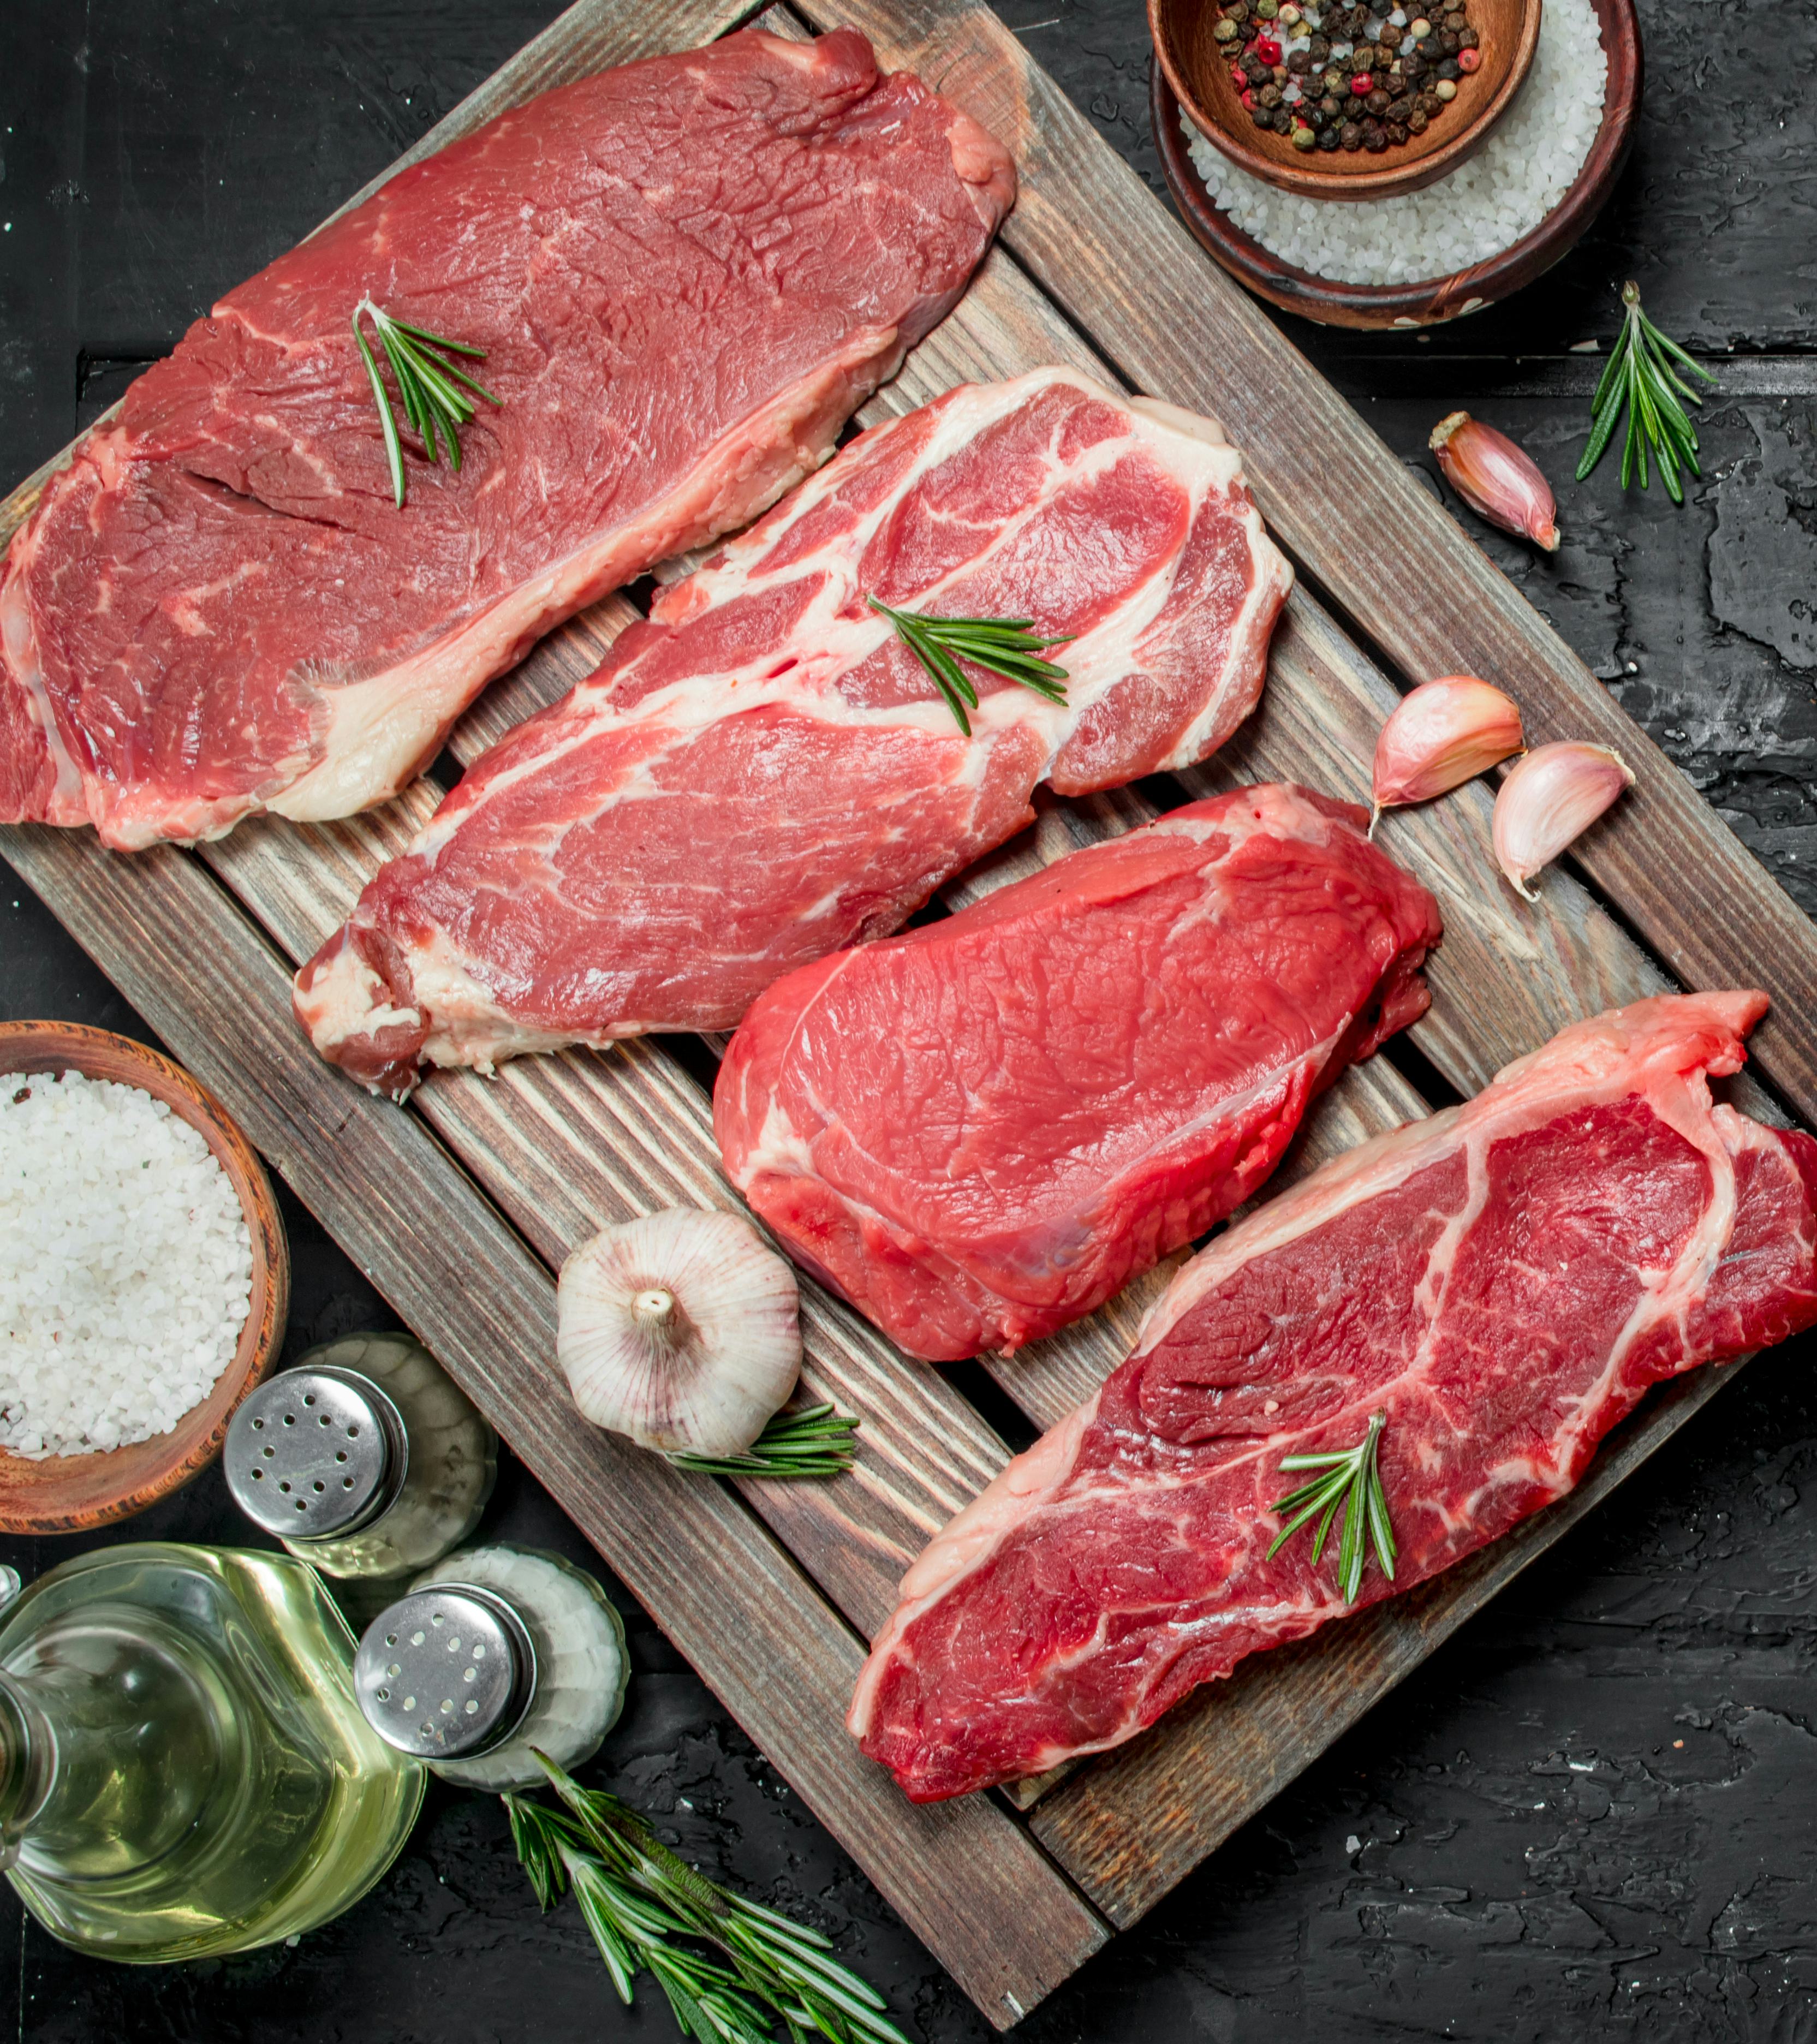 Four cuts of uncooked meat are resting on a wooden board. Salt, pepper and other seasonings are next to the board.